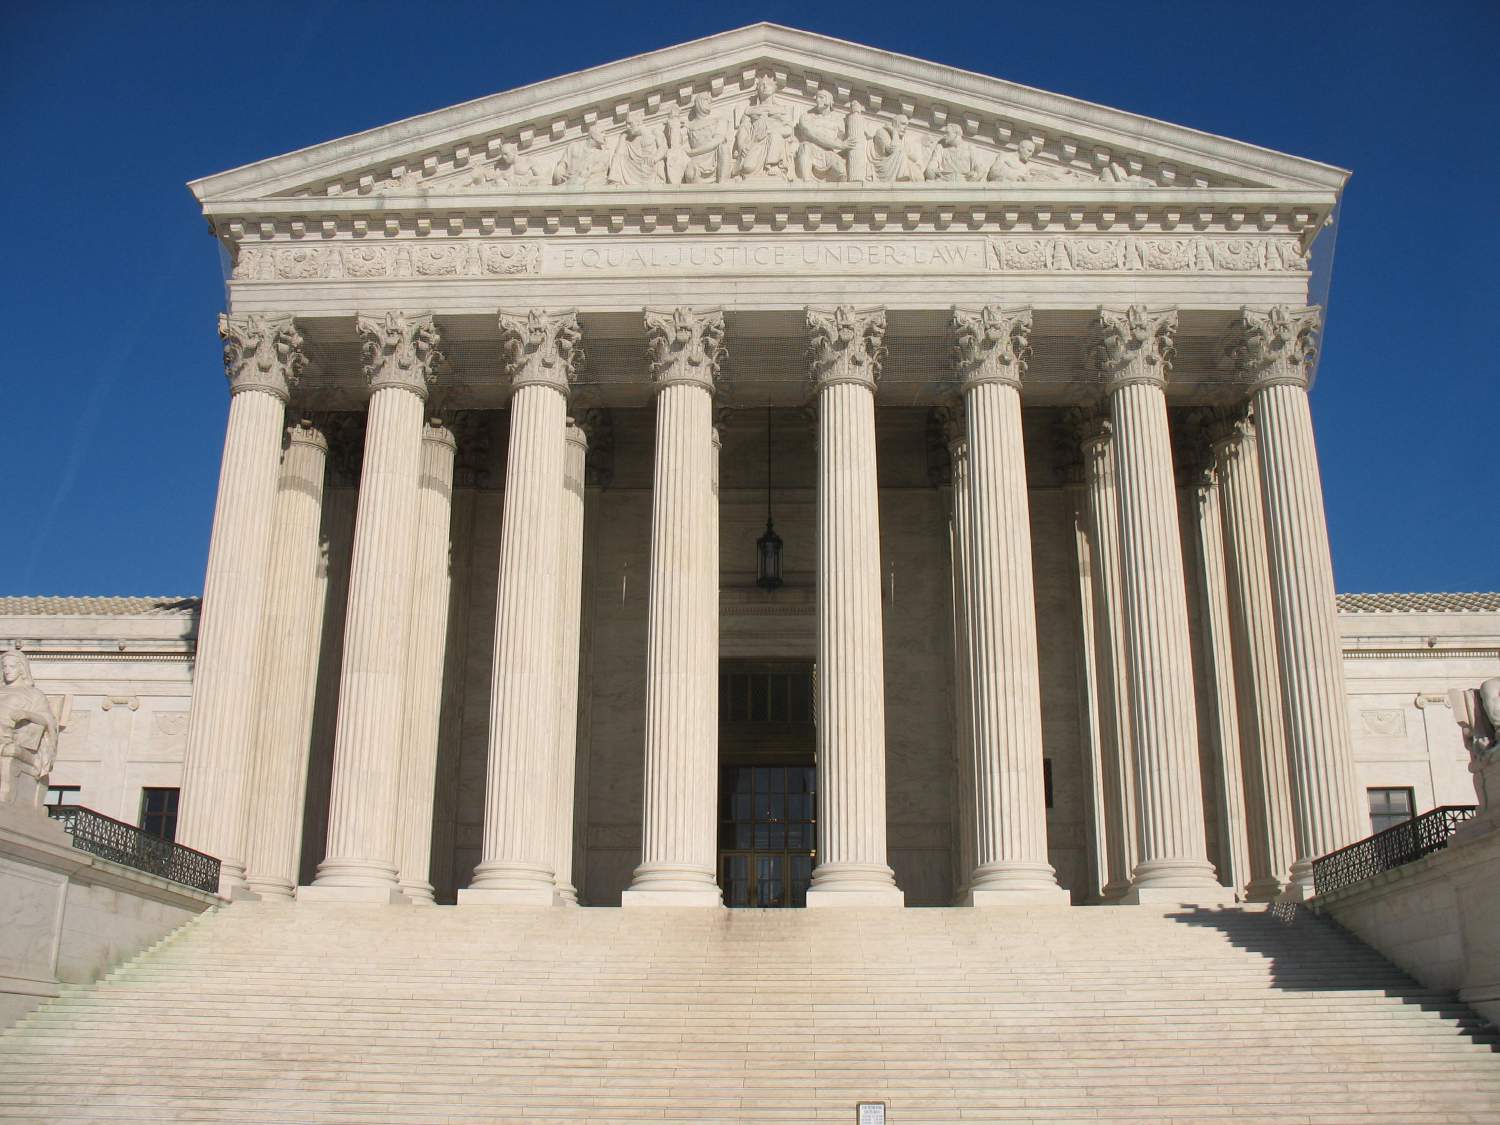 The role of the US Supreme Court on women's rights